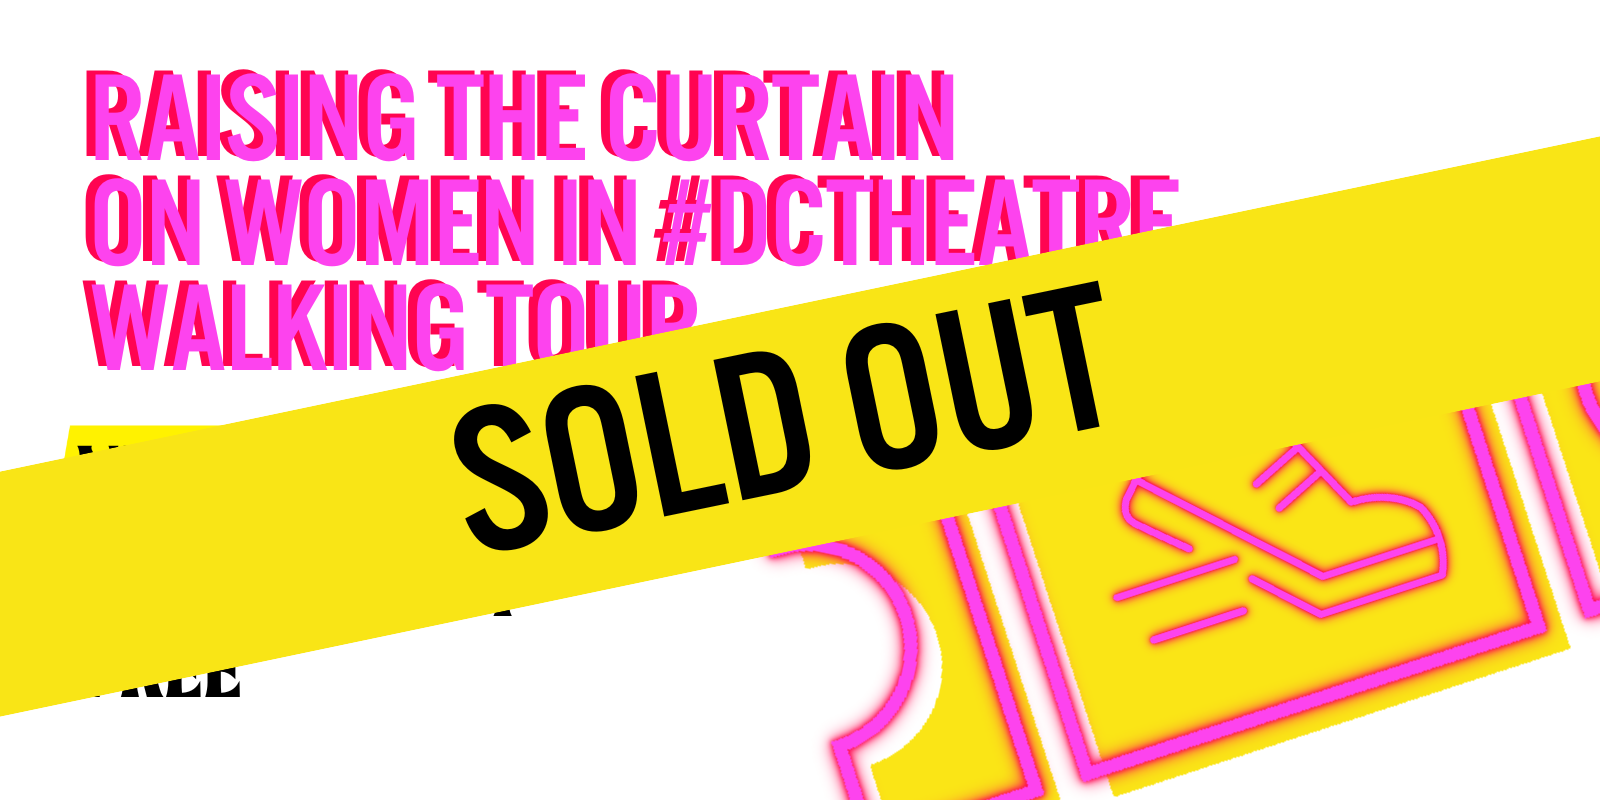 raising the curtain on women in #dctheatre walking tour SOLD OUT